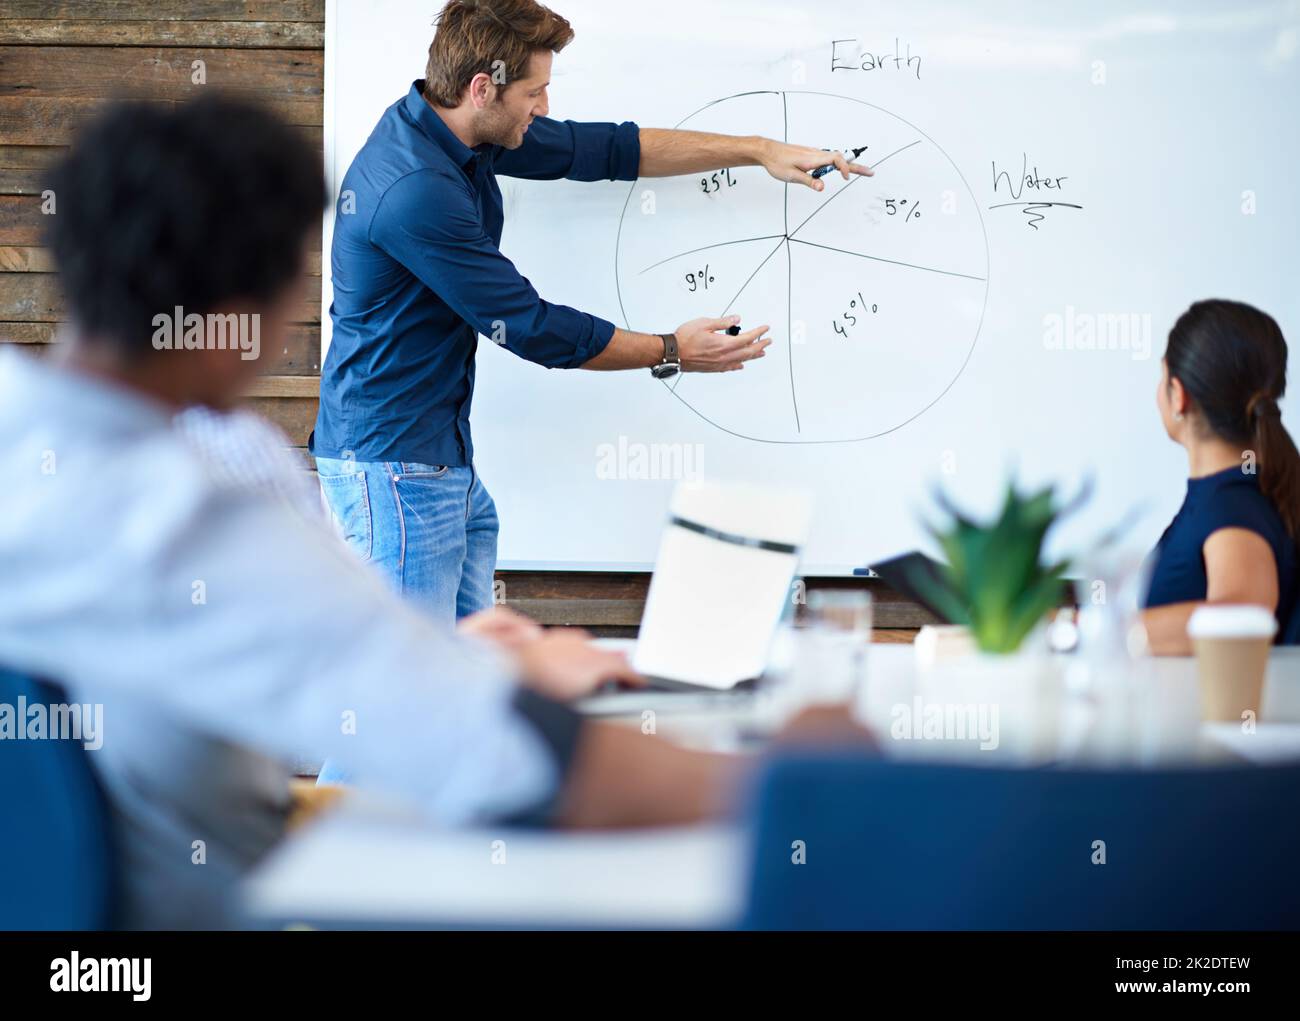 Planning for corporate growth. Creative professional using a white board to give a presentation in a bright modern meeting room. Stock Photo